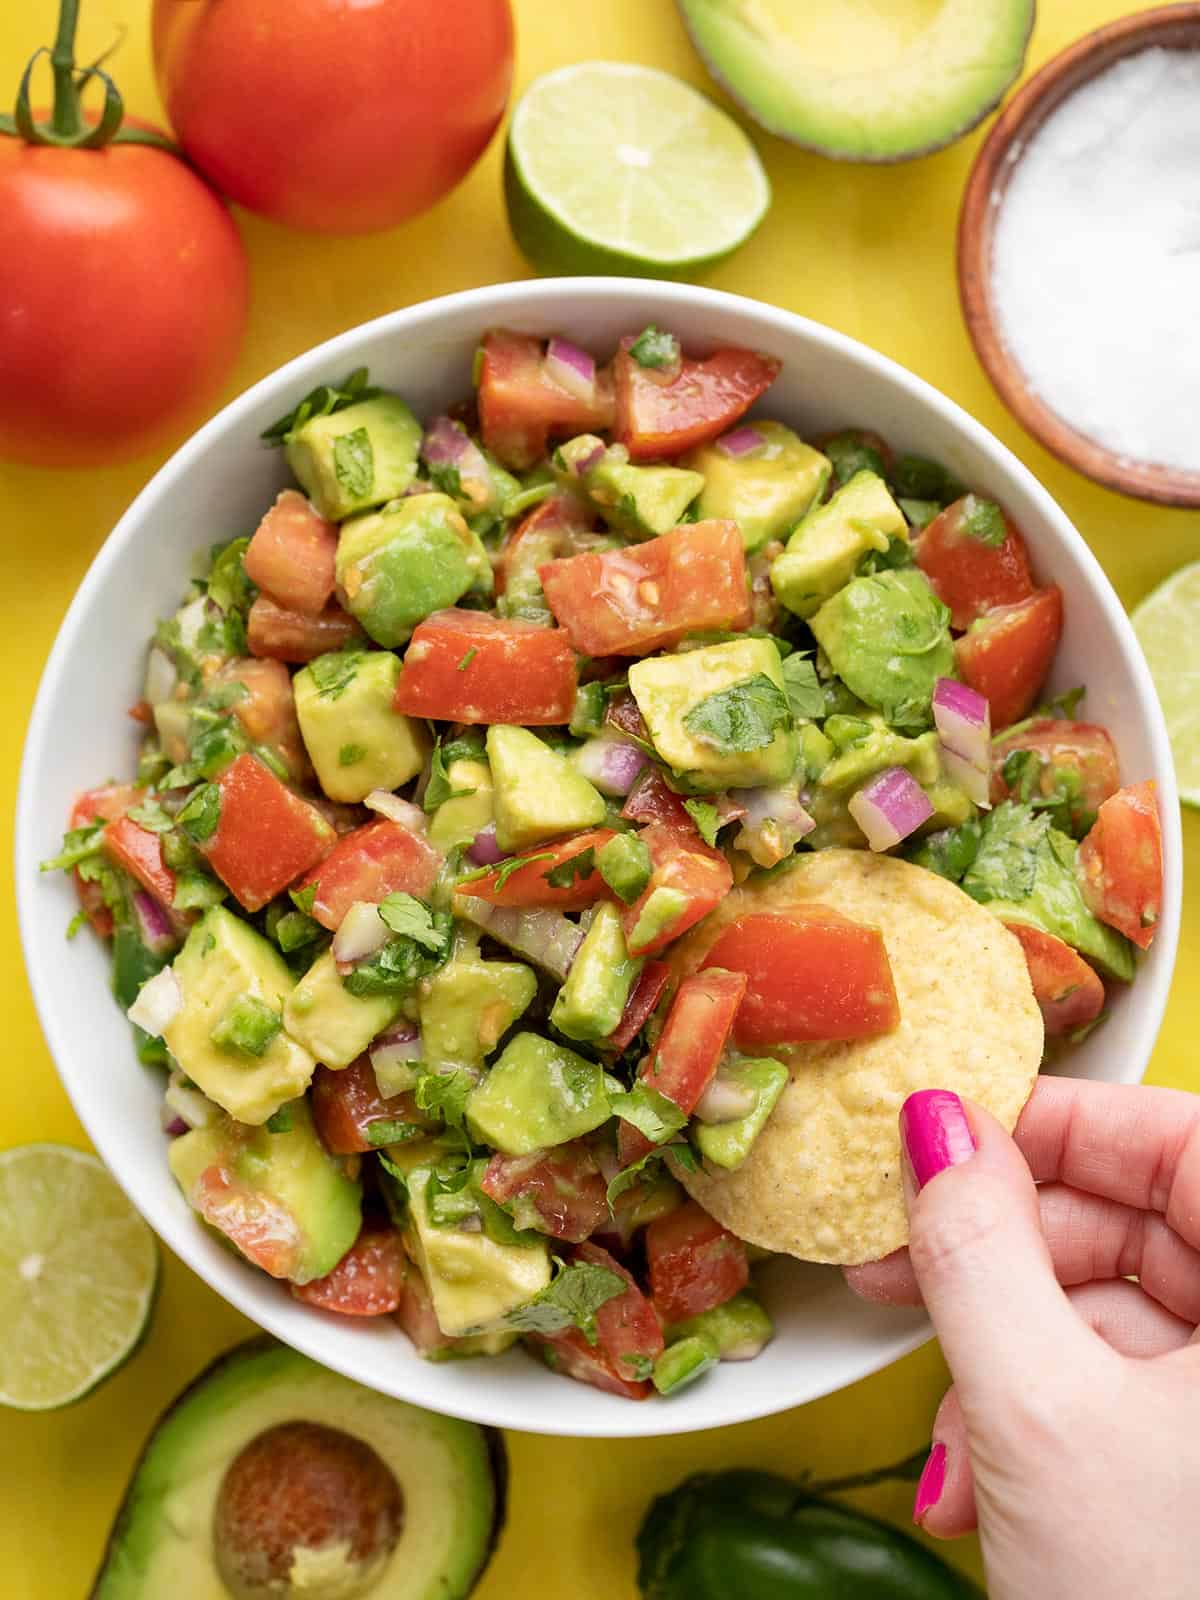 A chip dipping into a bowl of avocado and tomato salad on a yellow background.